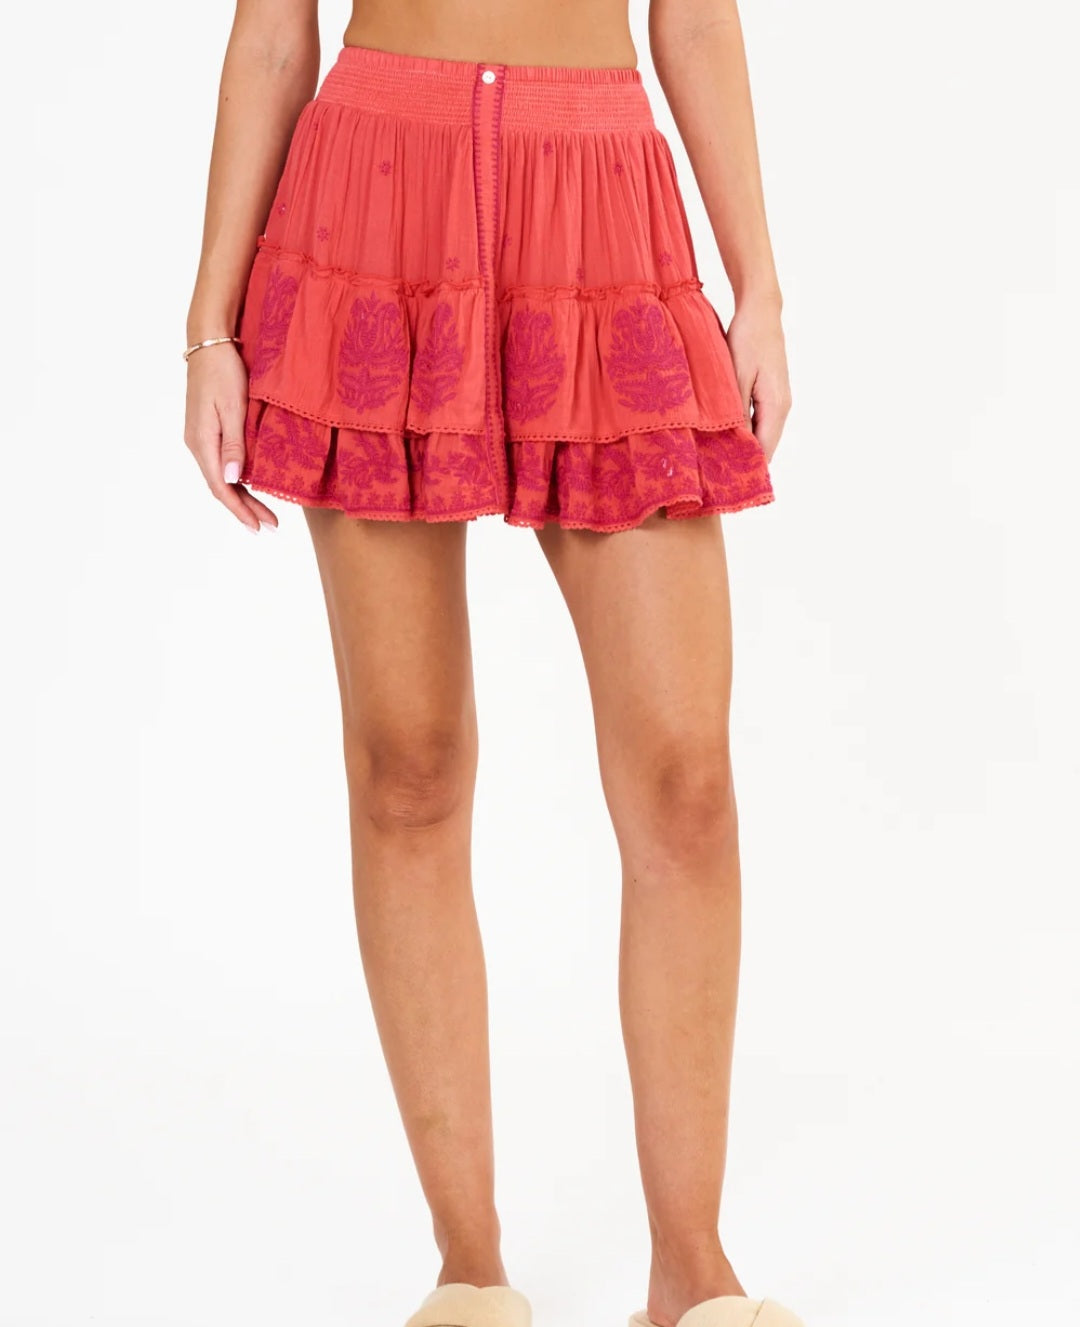 MABE Mina Embroidered Mini Skirt Coral